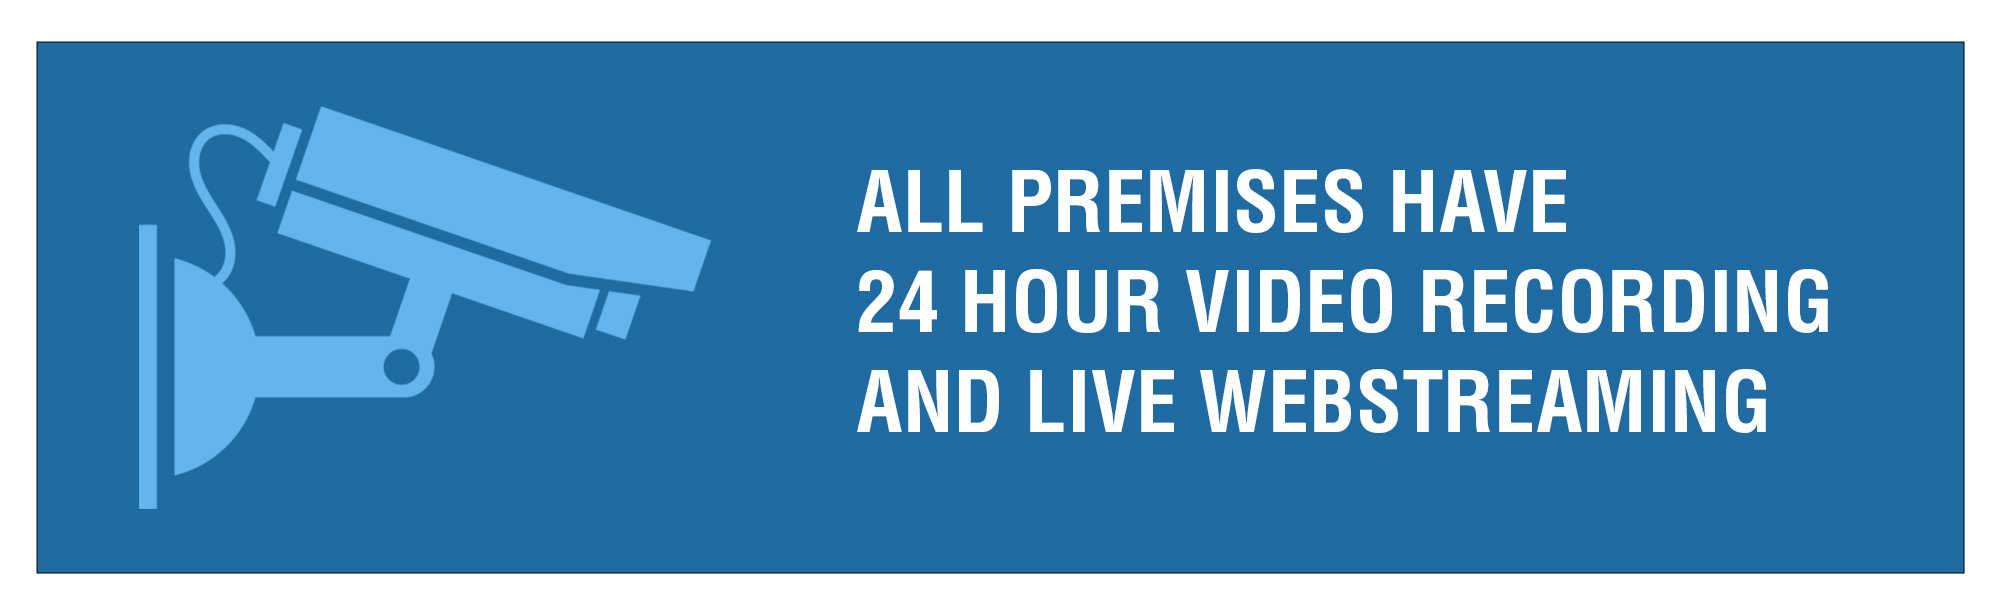 all premises have 24 hour video recording